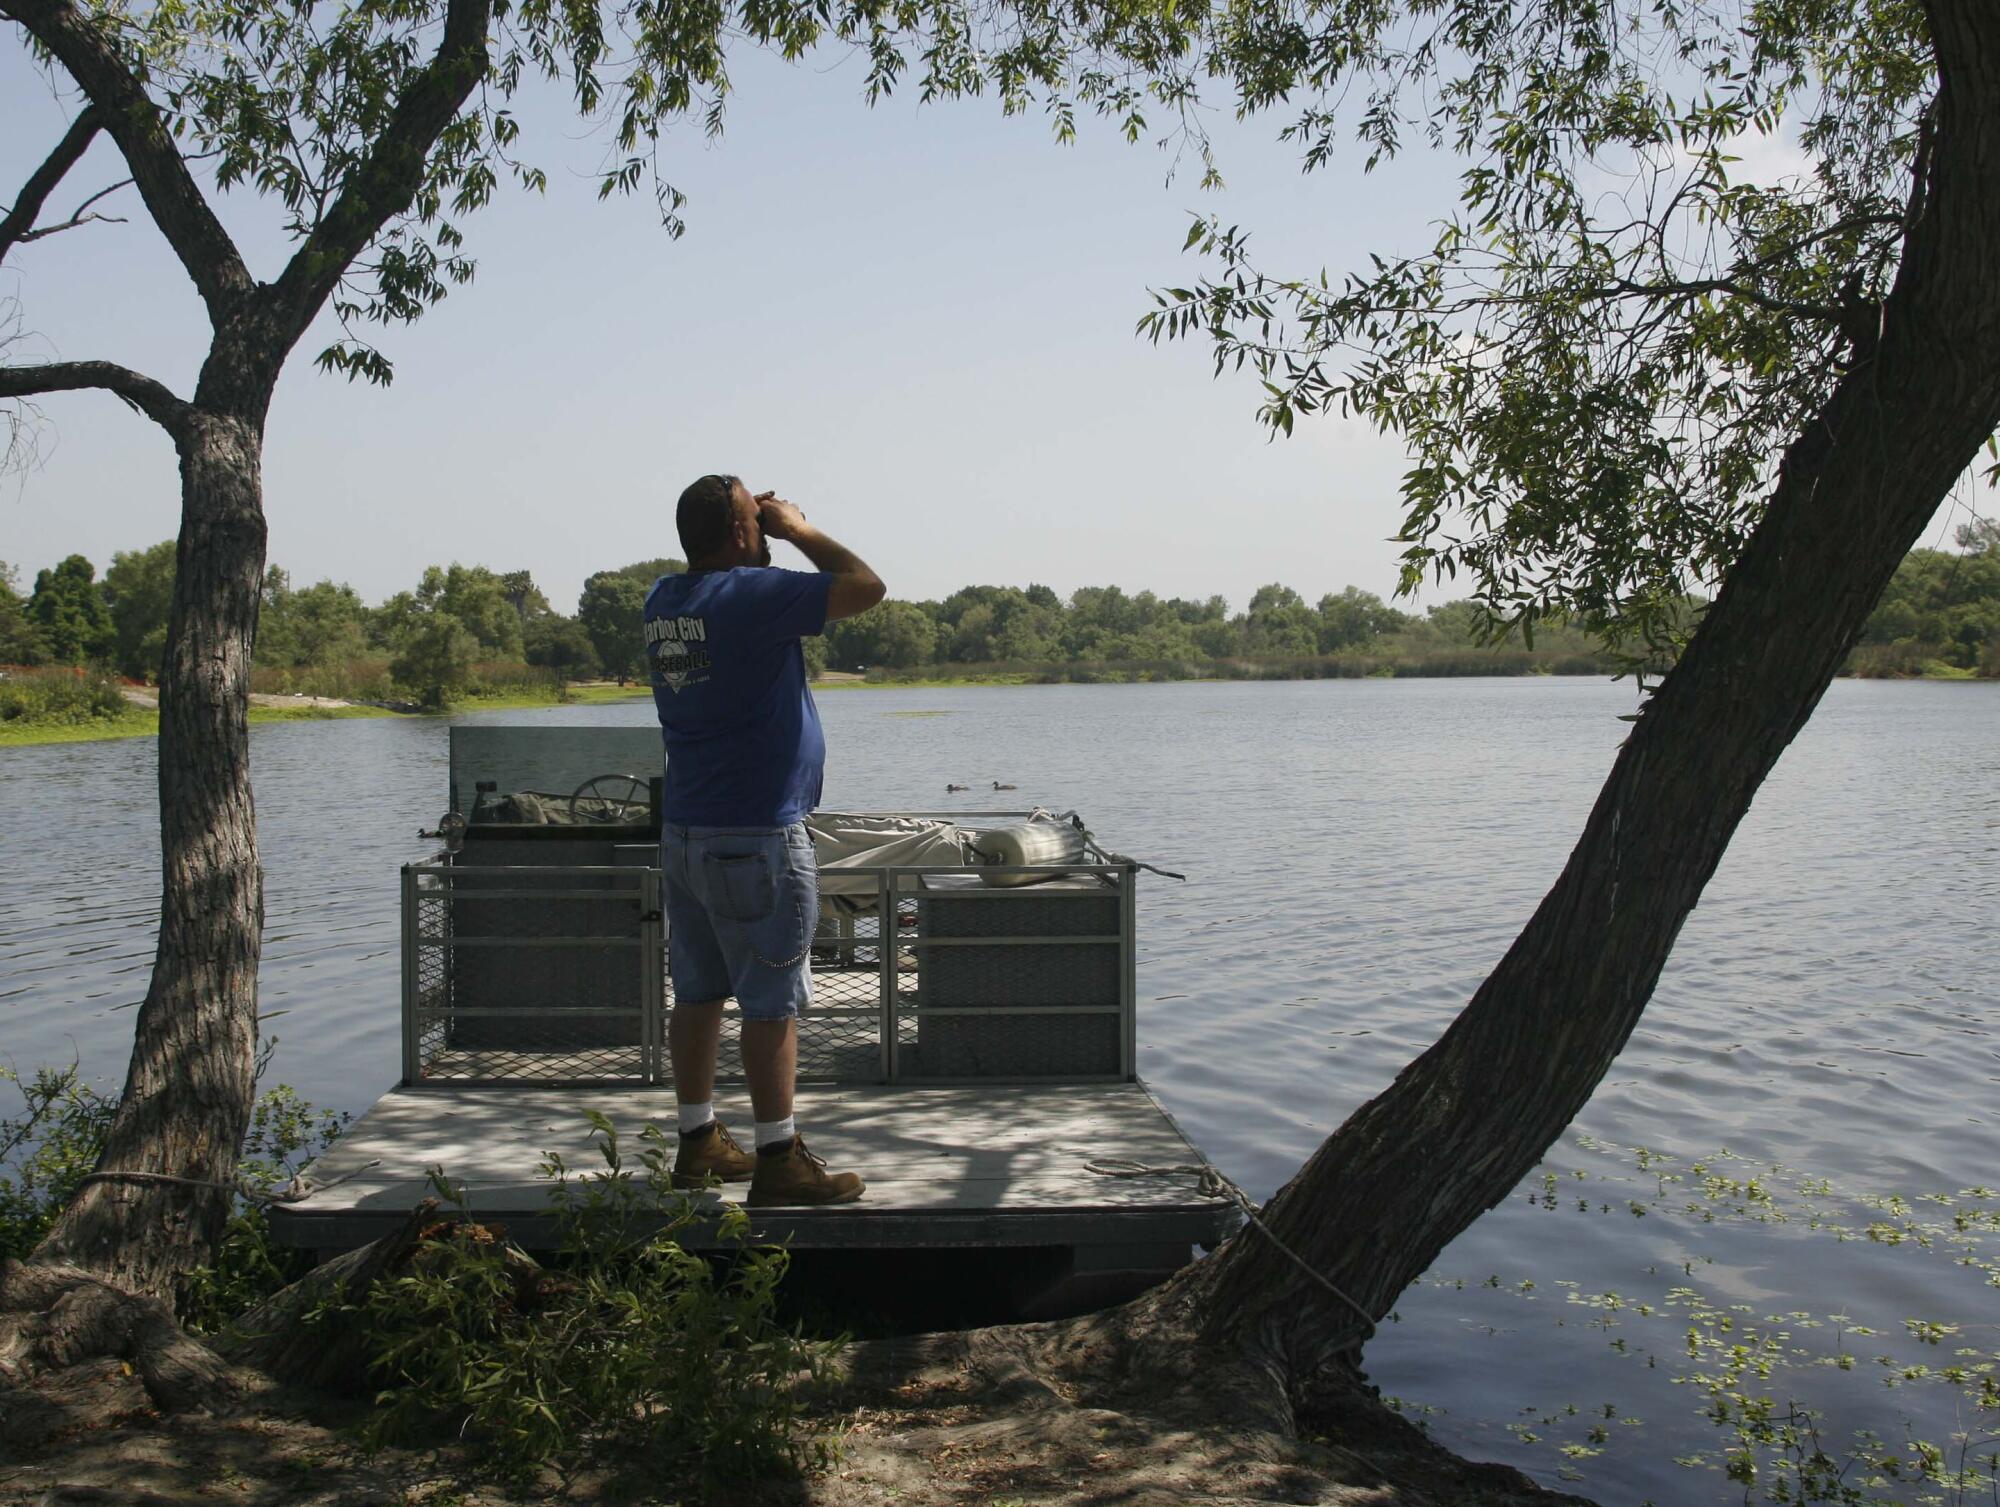 City worker Neal Weeks looks out over Lake Machado